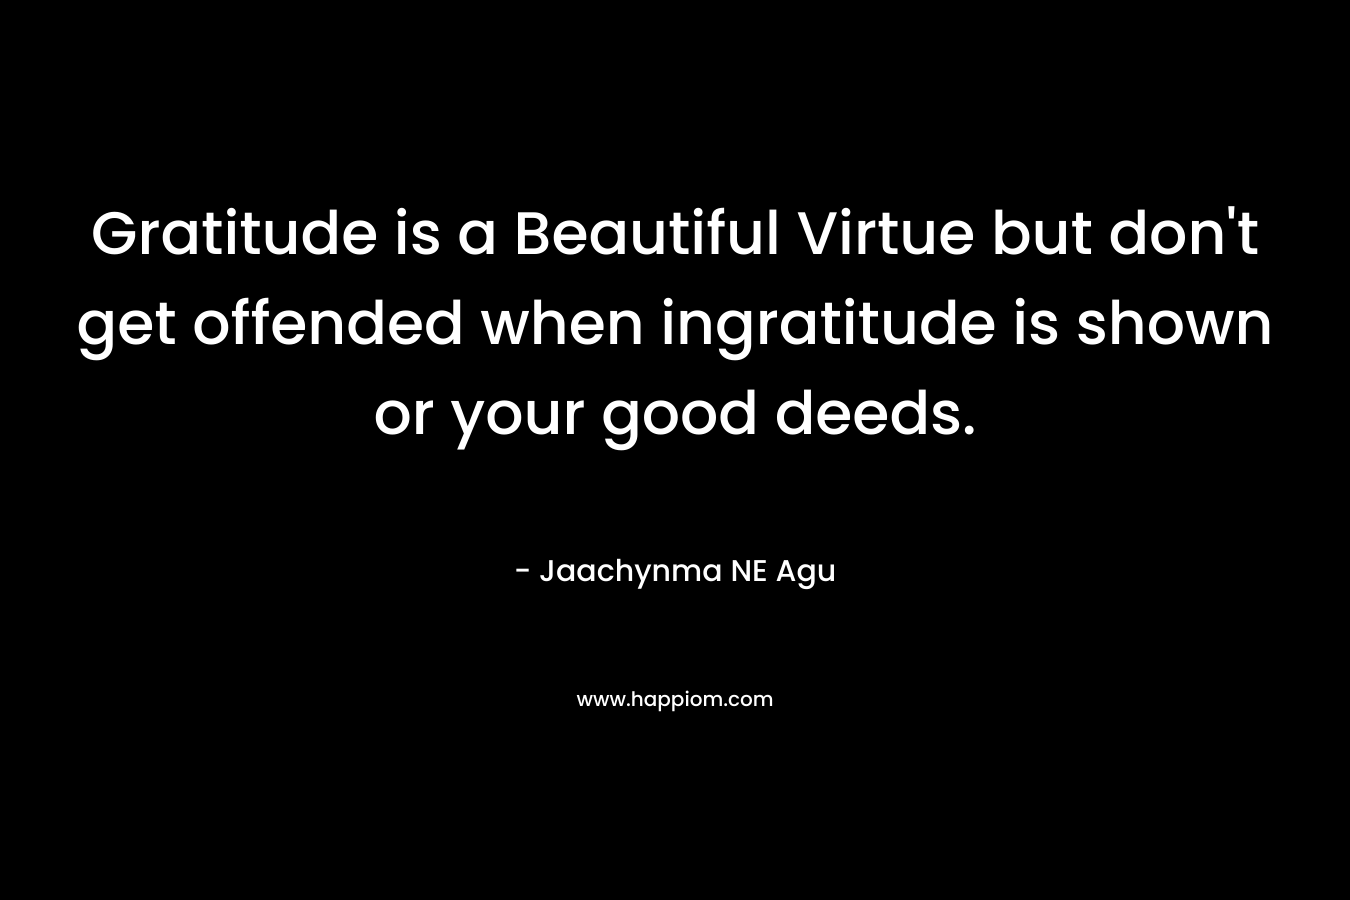 Gratitude is a Beautiful Virtue but don't get offended when ingratitude is shown or your good deeds.